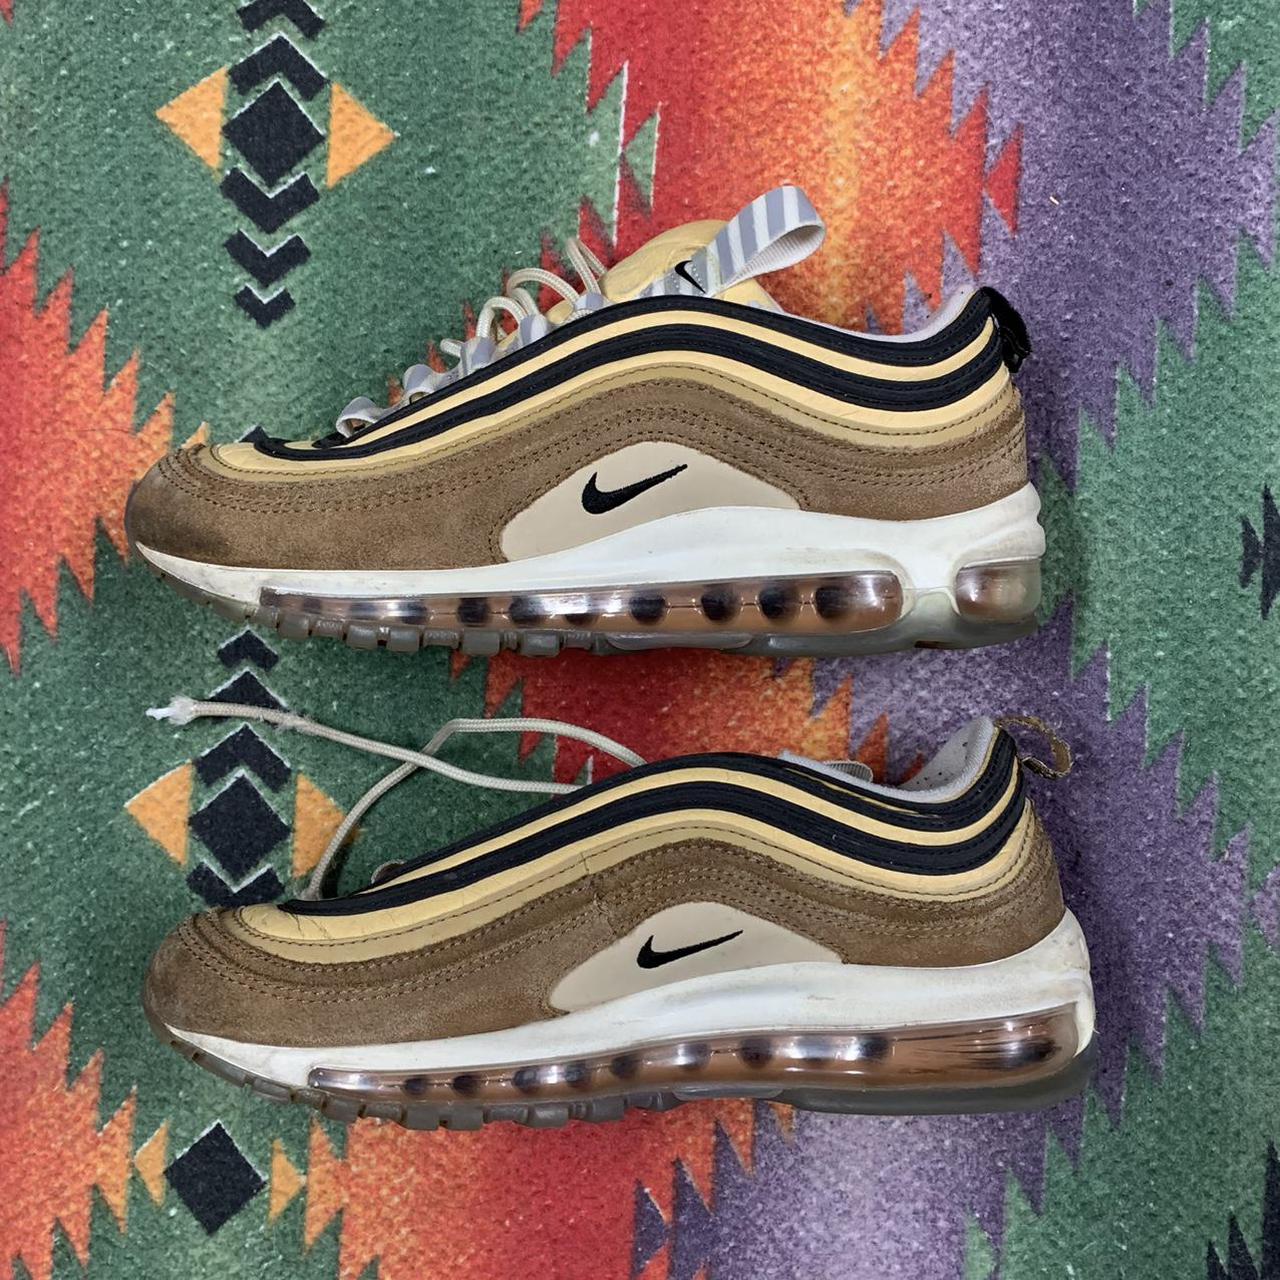 Nike Air Max 97s Brown Ale Sneakers $5 shipping... - Depop